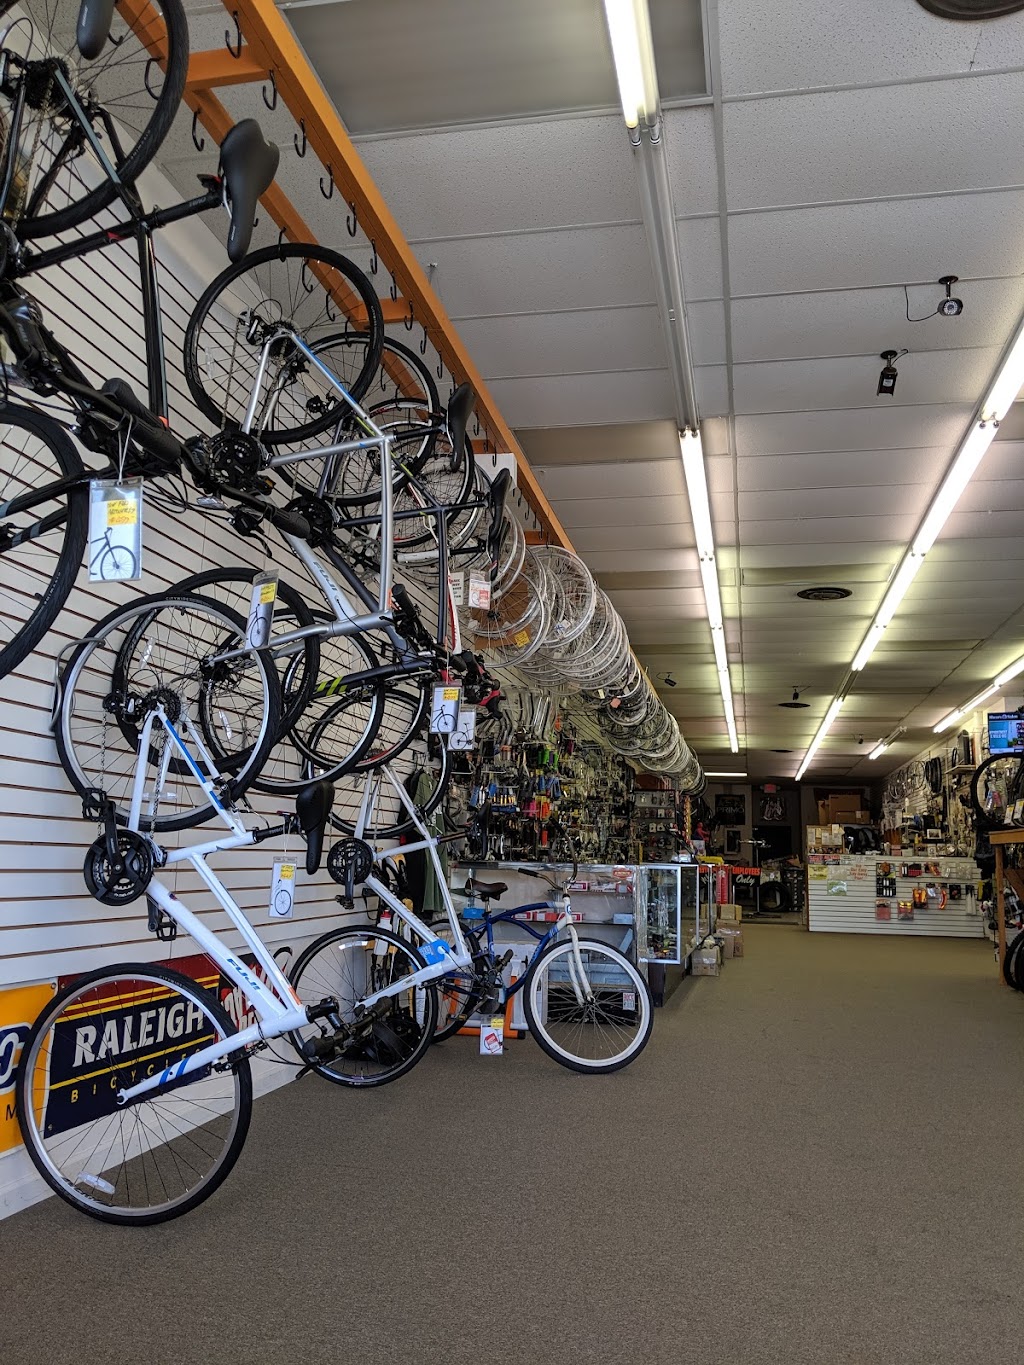 Tonys Bicycle Skatesboard Shp | 1612 S Governors Ave, Dover, DE 19904 | Phone: (302) 674-0477